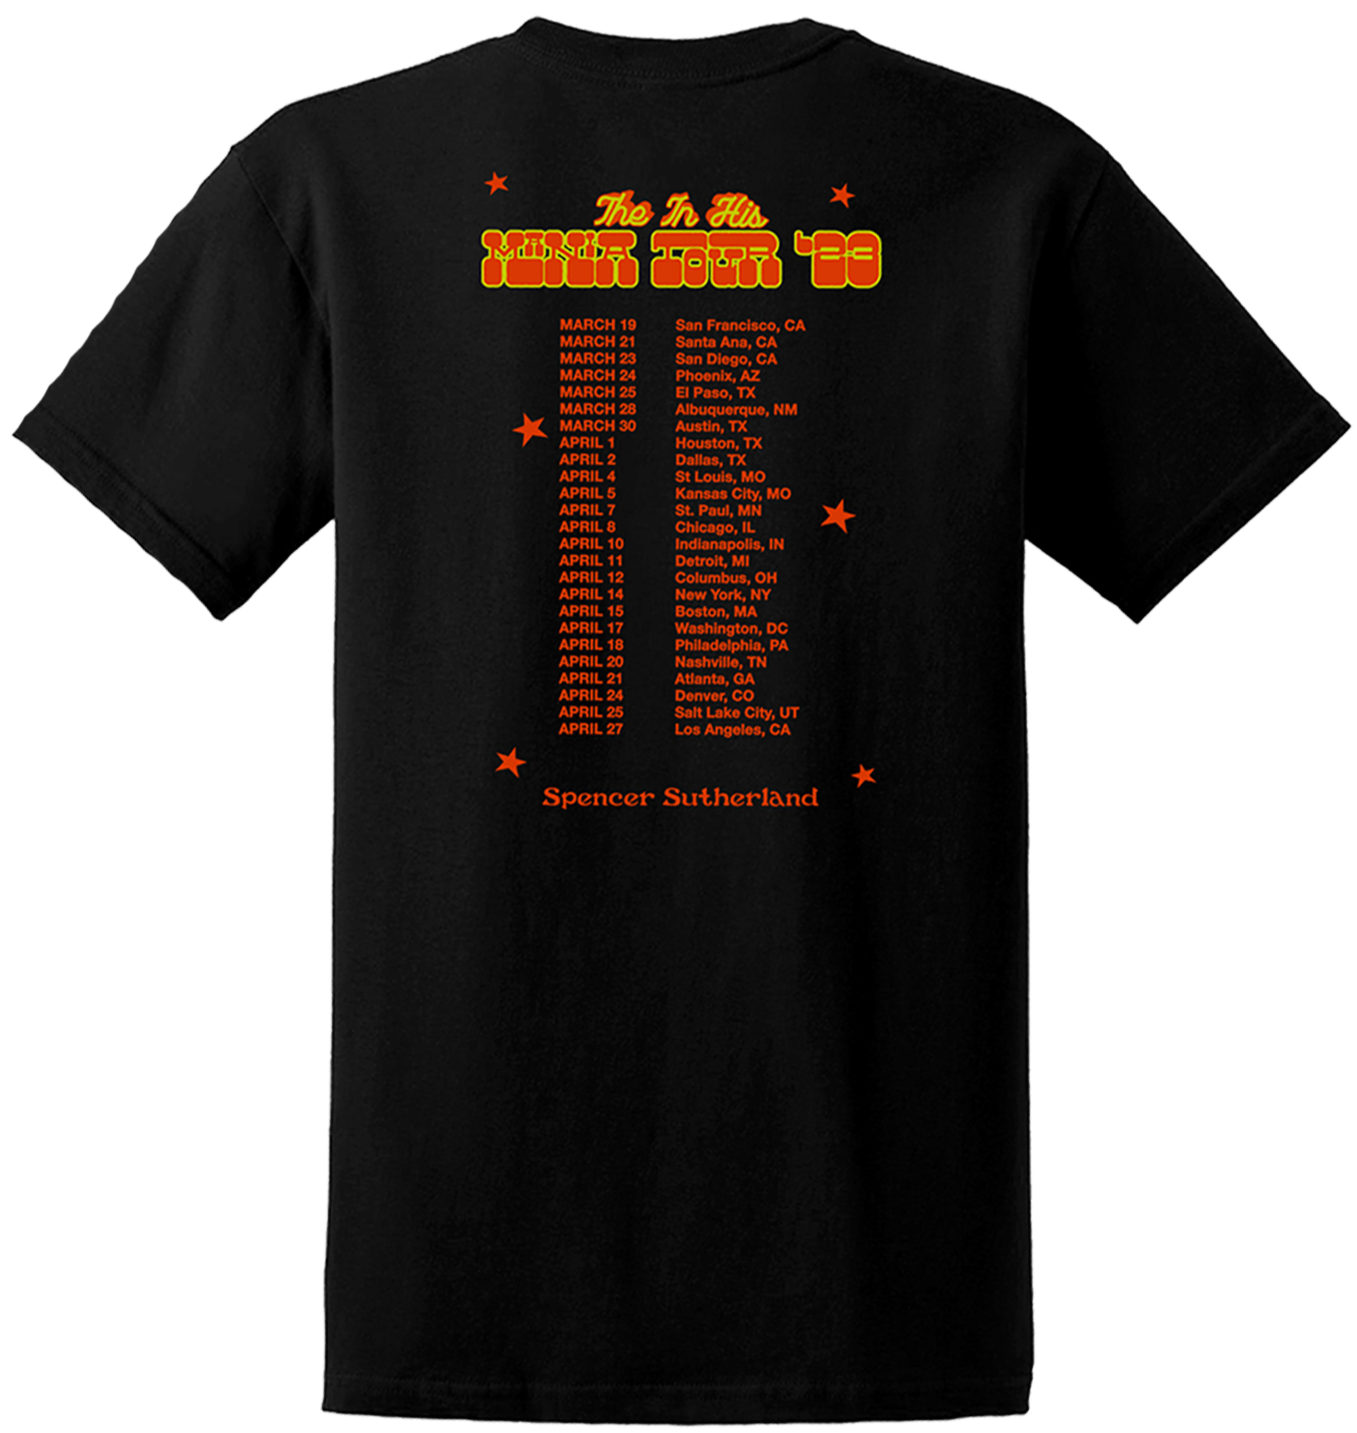 "In His Mania" Official Tour Tee